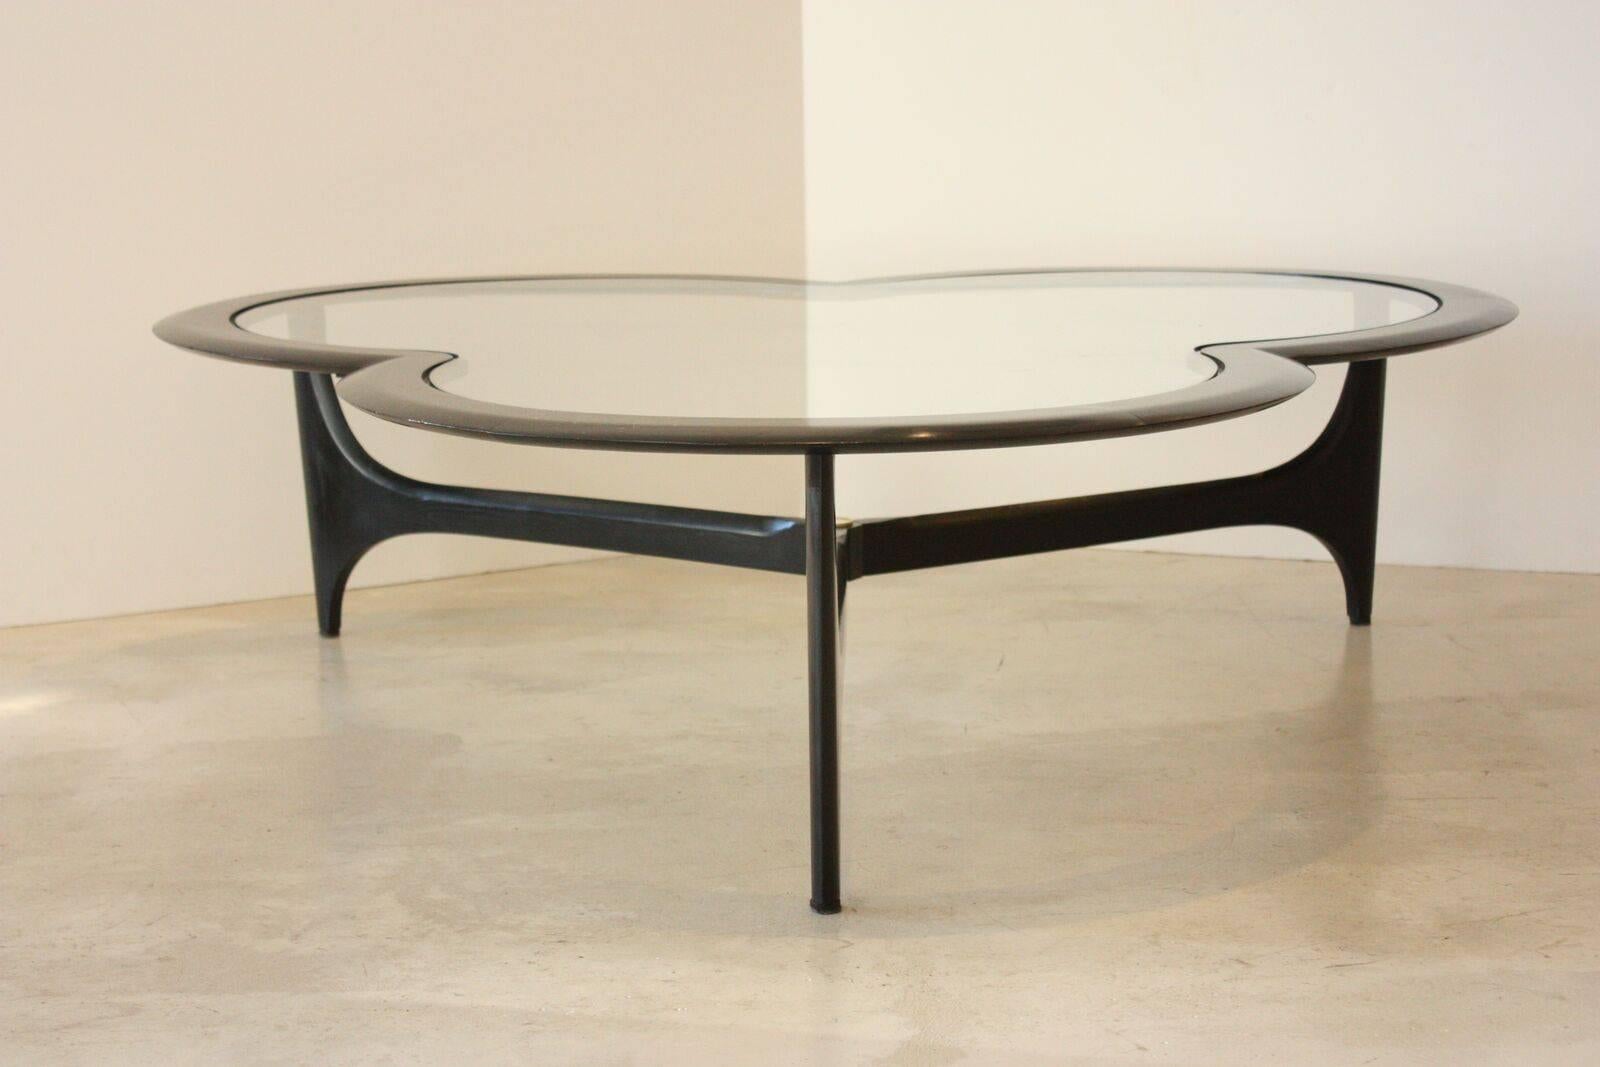 Solid walnut coffee table with inset glass, designed by Adrian Pearsall for Lane, circa 1960s. Solid ebonized walnut table is in the form of a clover leaf and is beveled along the edges. This Classic Mid-Century table is in excellent condition for